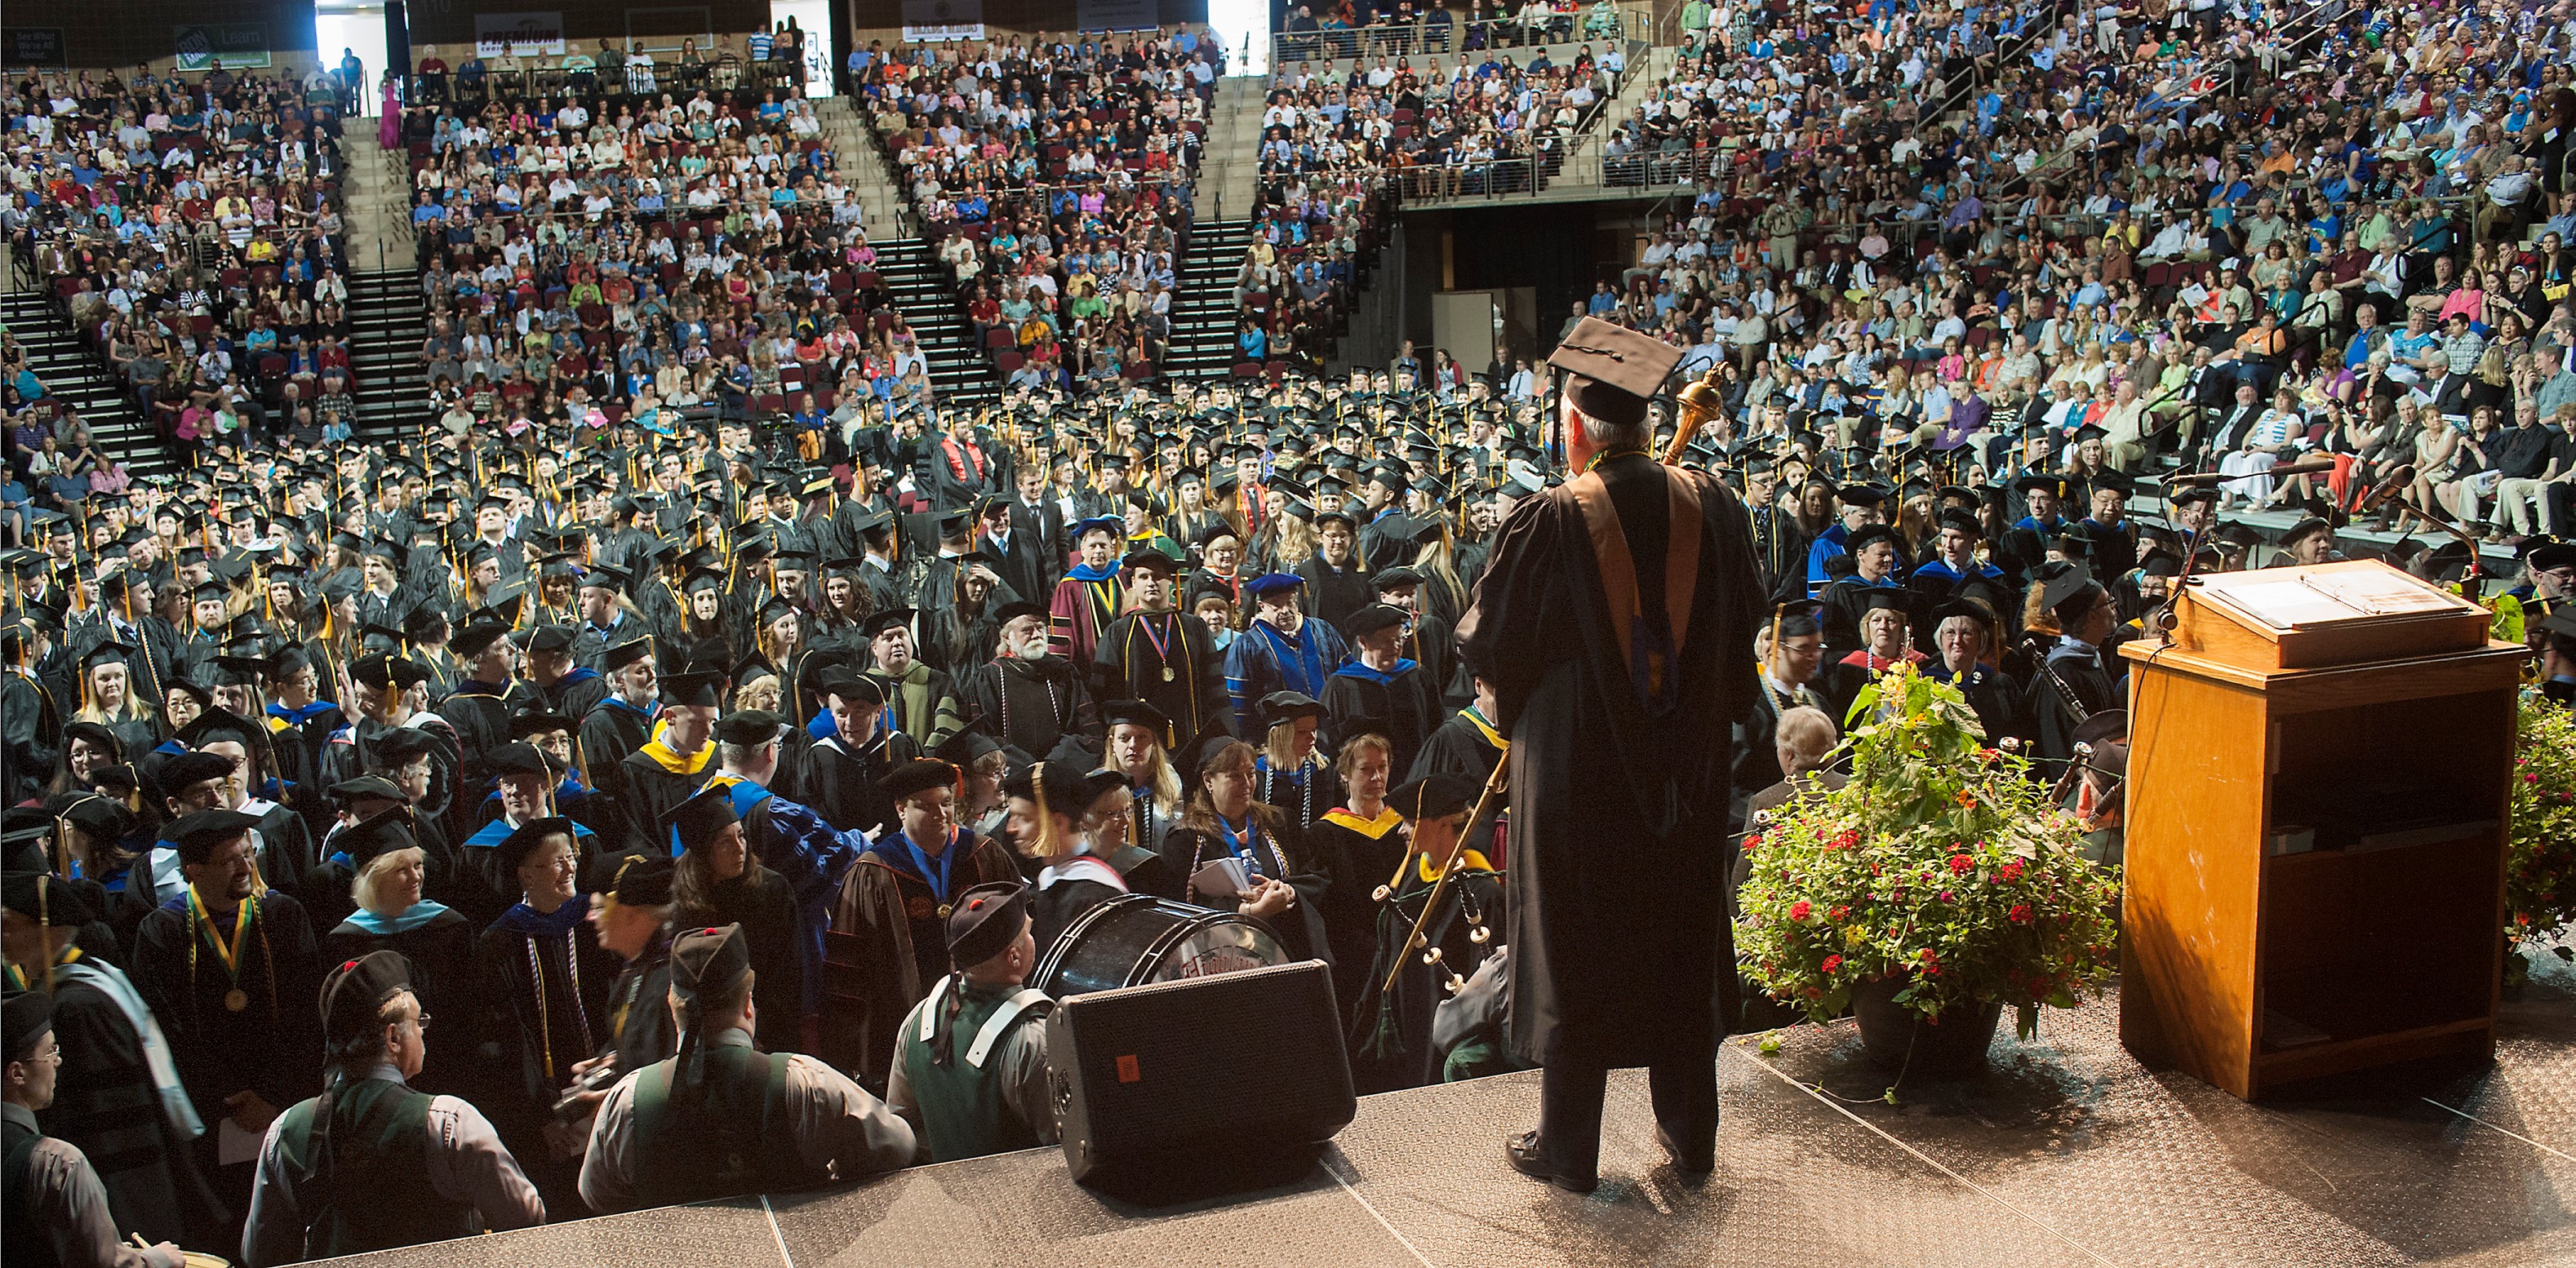 Husson University's 2014 Commencement was held at the Cross Insurance Center